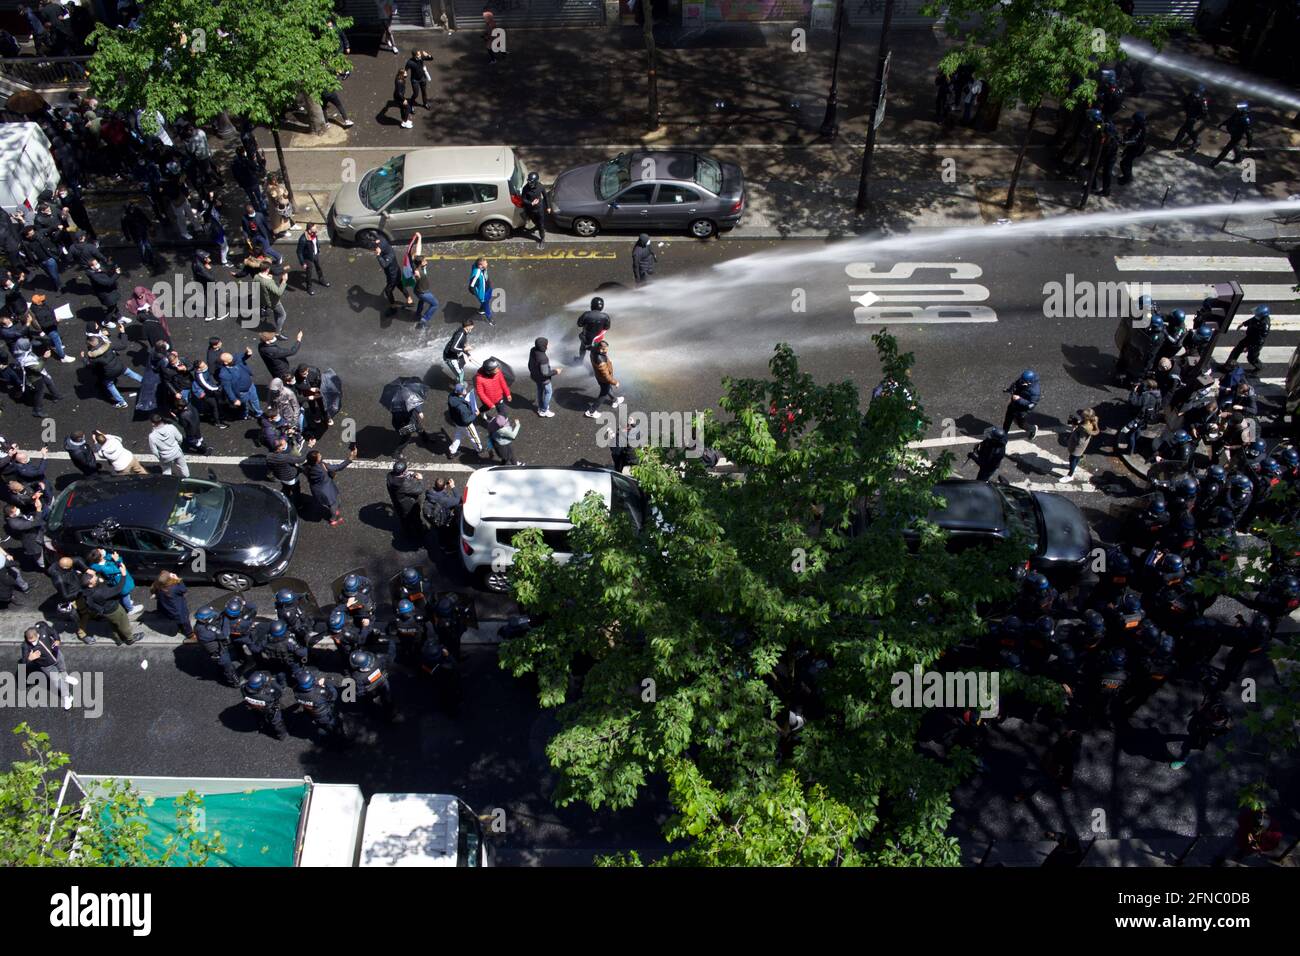 Police fire water cannon at pro-Palestinian demonstrators in Paris. Boulevard Barbès, Paris, France, 15th May, 2021 Stock Photo